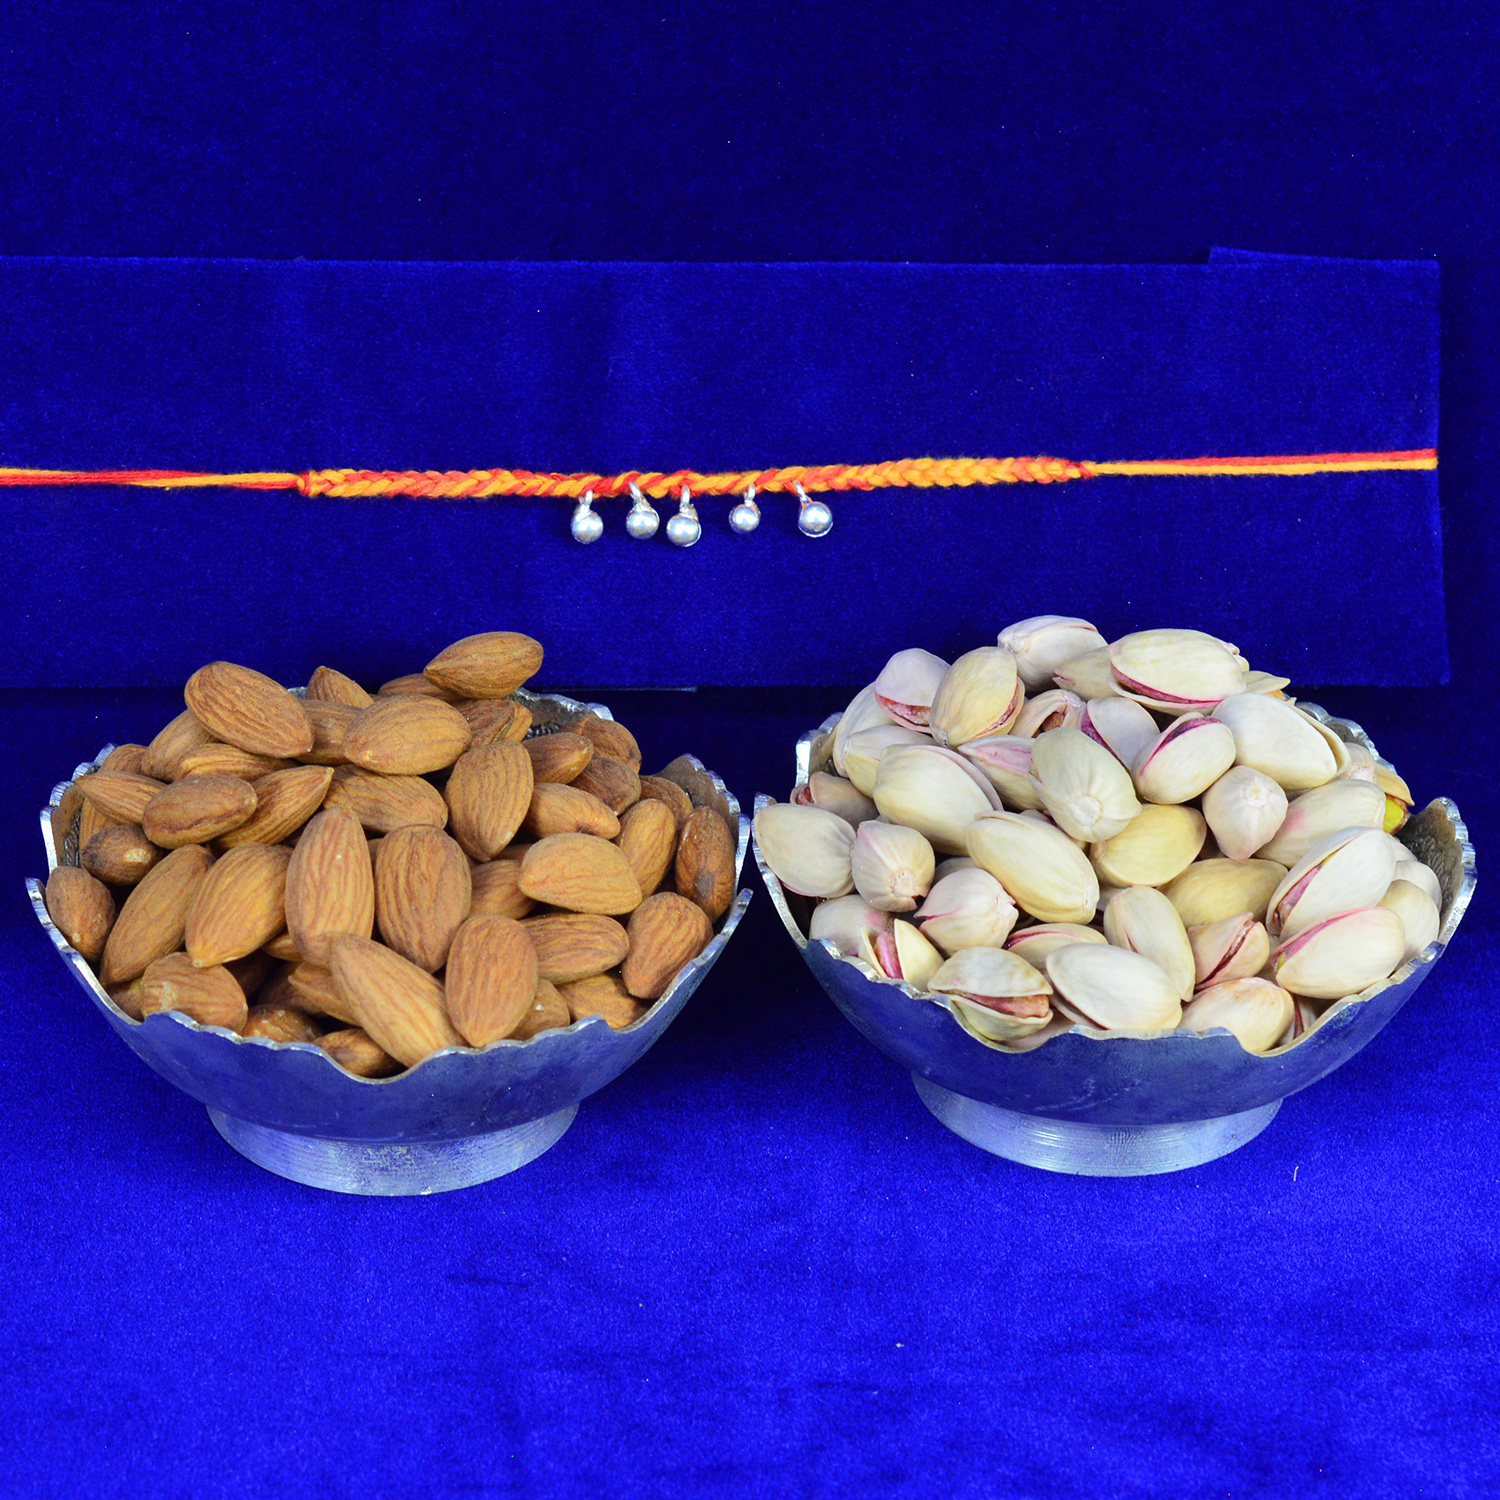 Almonds and Pista Dry Fruits with Beautiful Looking Ghoongru Brother Rakhi